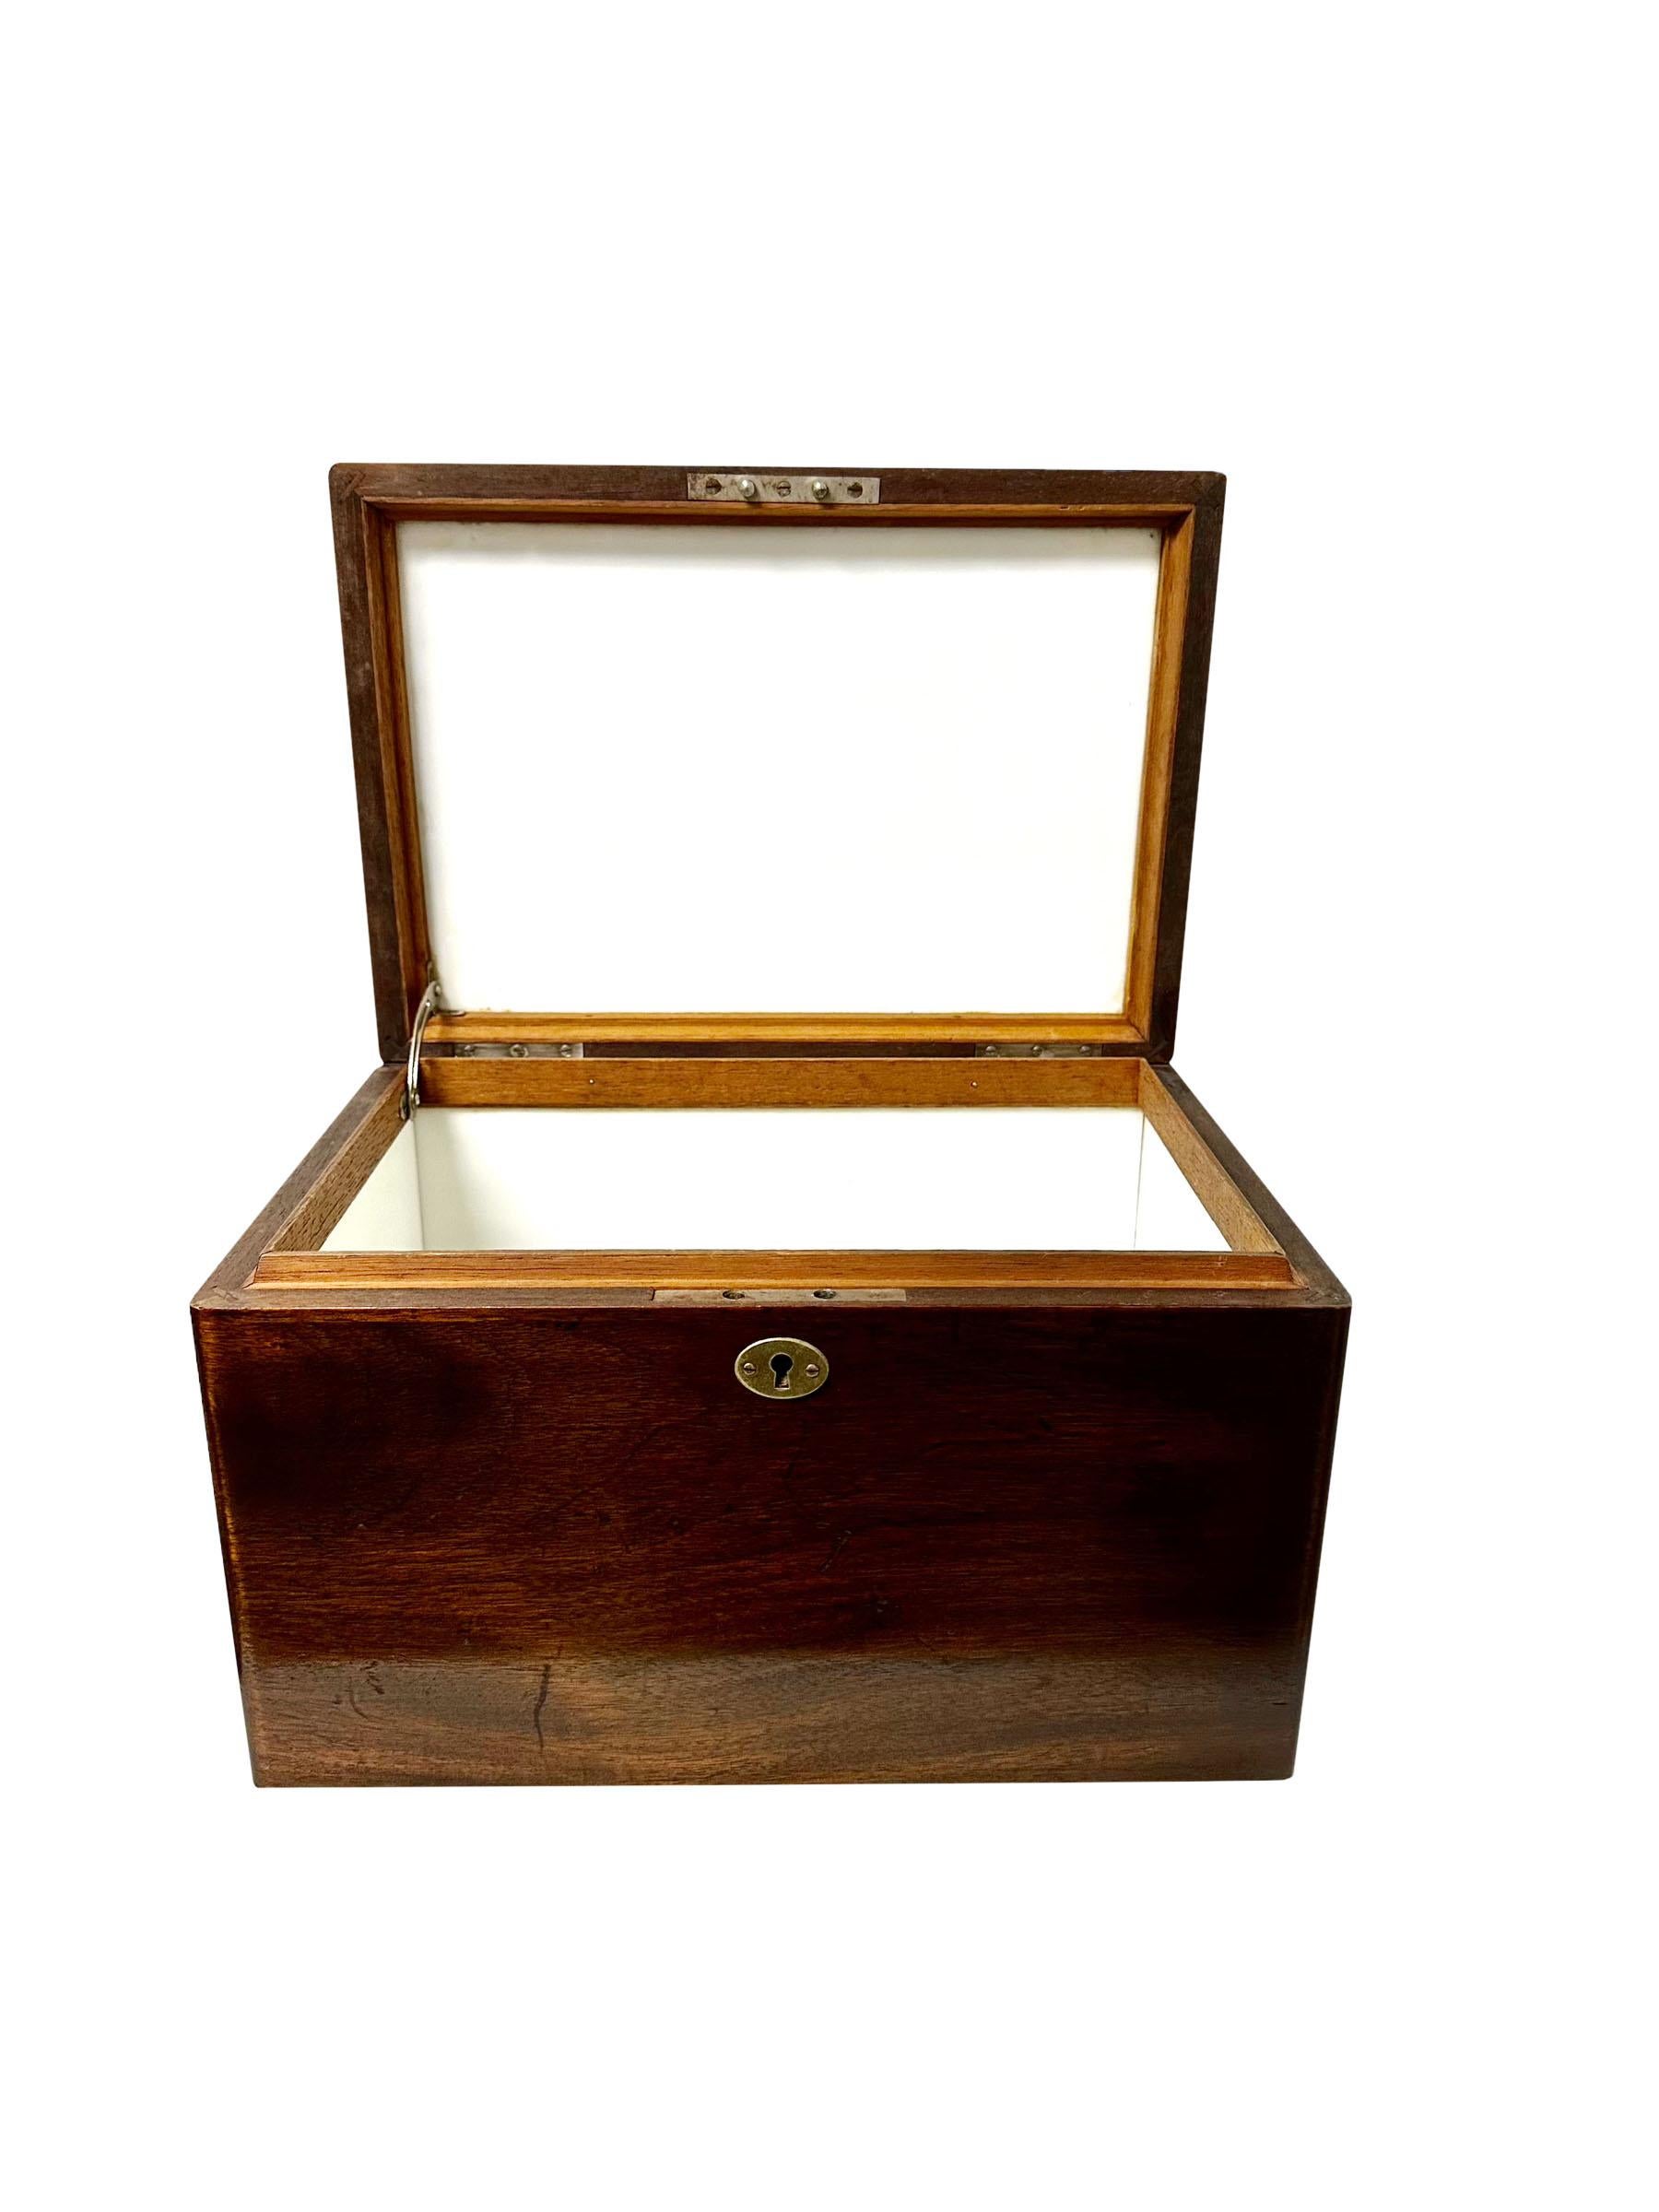 Early 20th Century English Rosewood Humidor For Sale